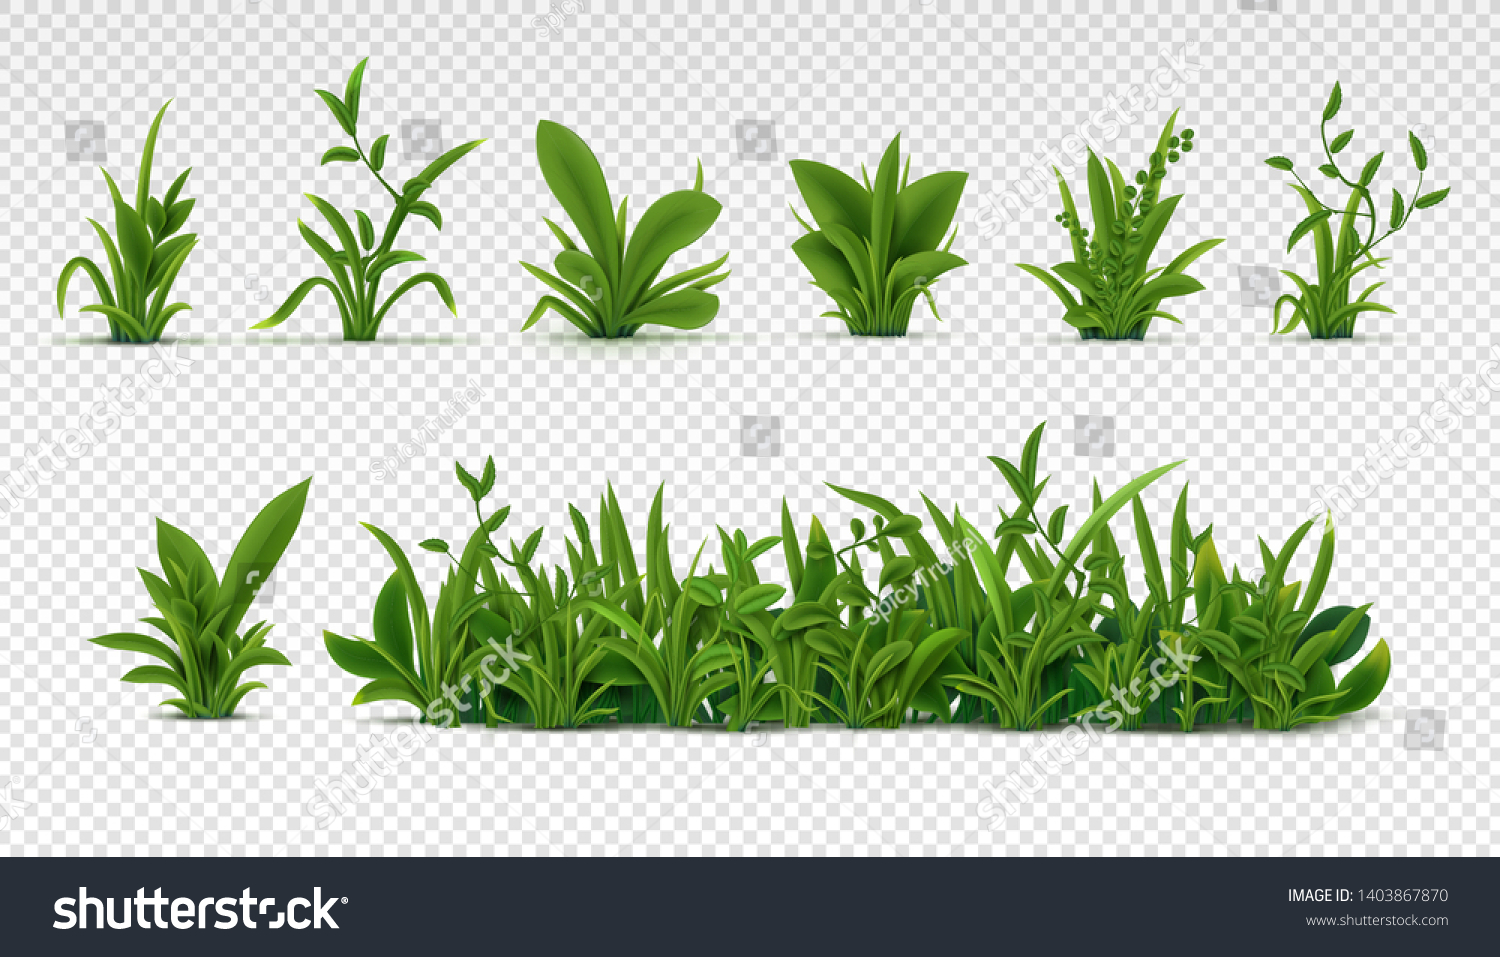 Realistic green grass. 3D fresh spring plants, different herbs and bushes for posters and advertisement. Vector set isolated objects on white #1403867870